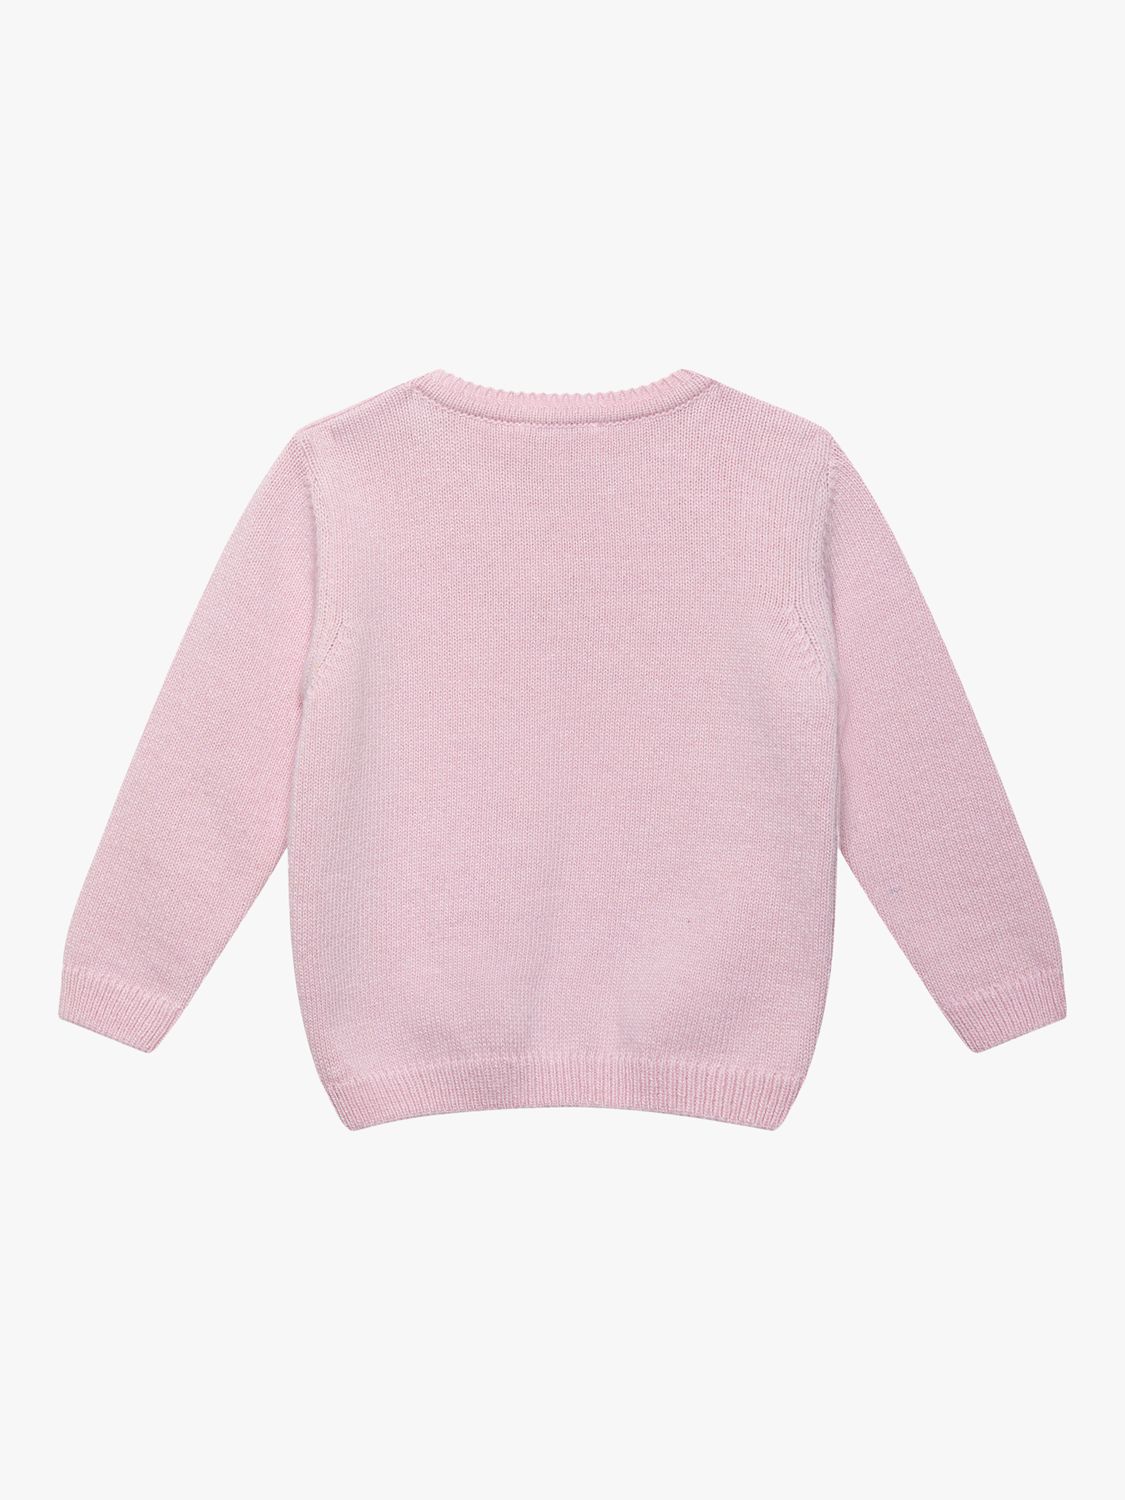 Trotters Baby Betty Bunny Merino & Cashmere Blend Jumper, Pale Pink, 3-6 months